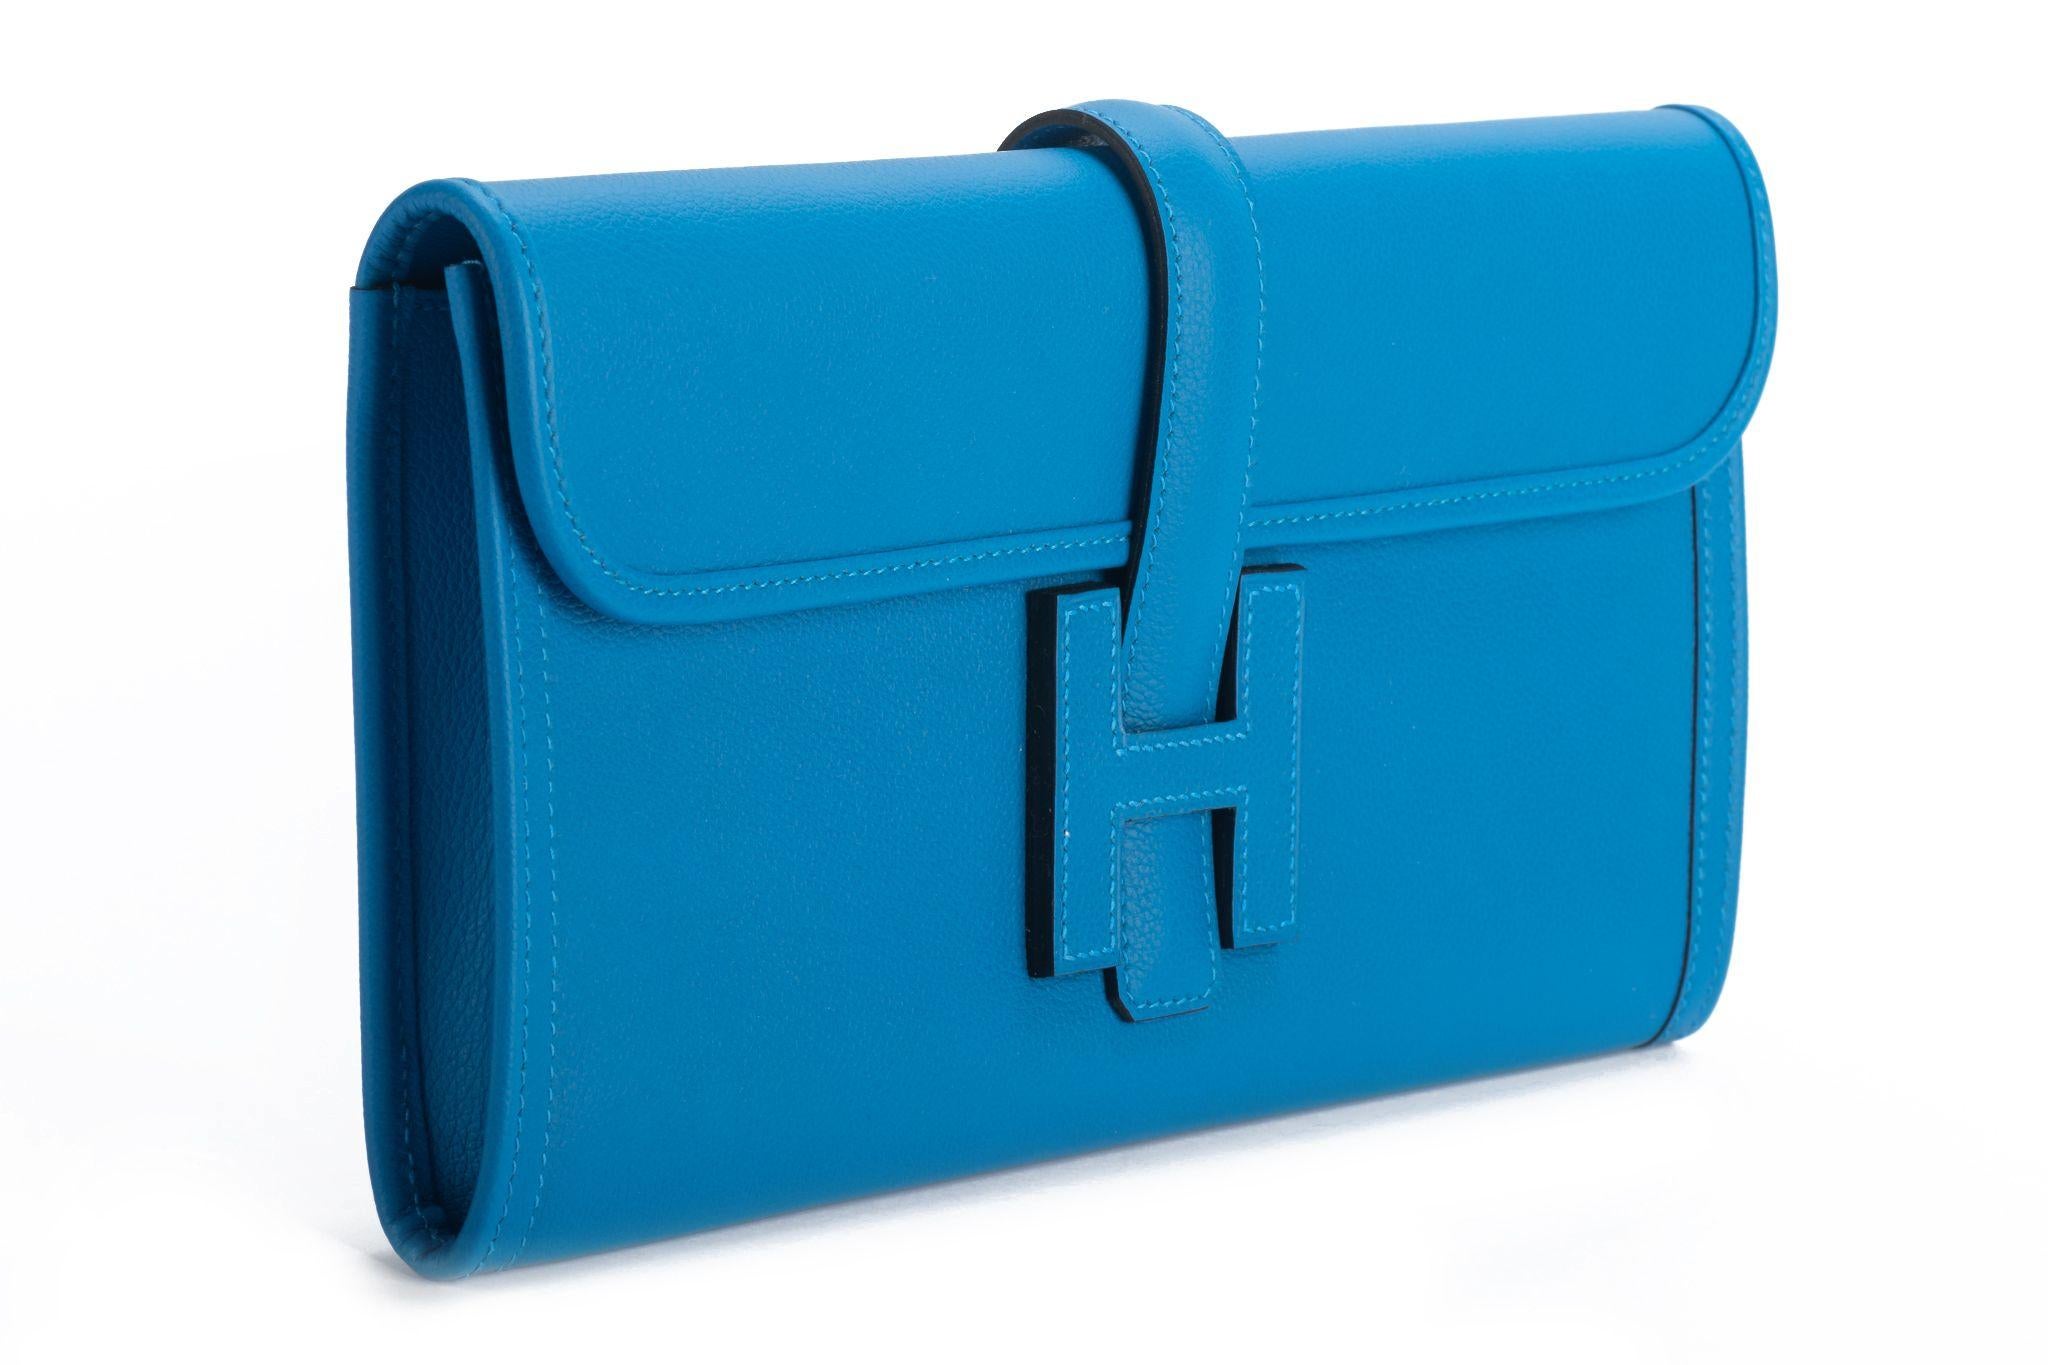 Hermes new blue hydra juge clutch in evercolor leather. Brand new with original dust cover and box. Date stamp Y for 2020.
